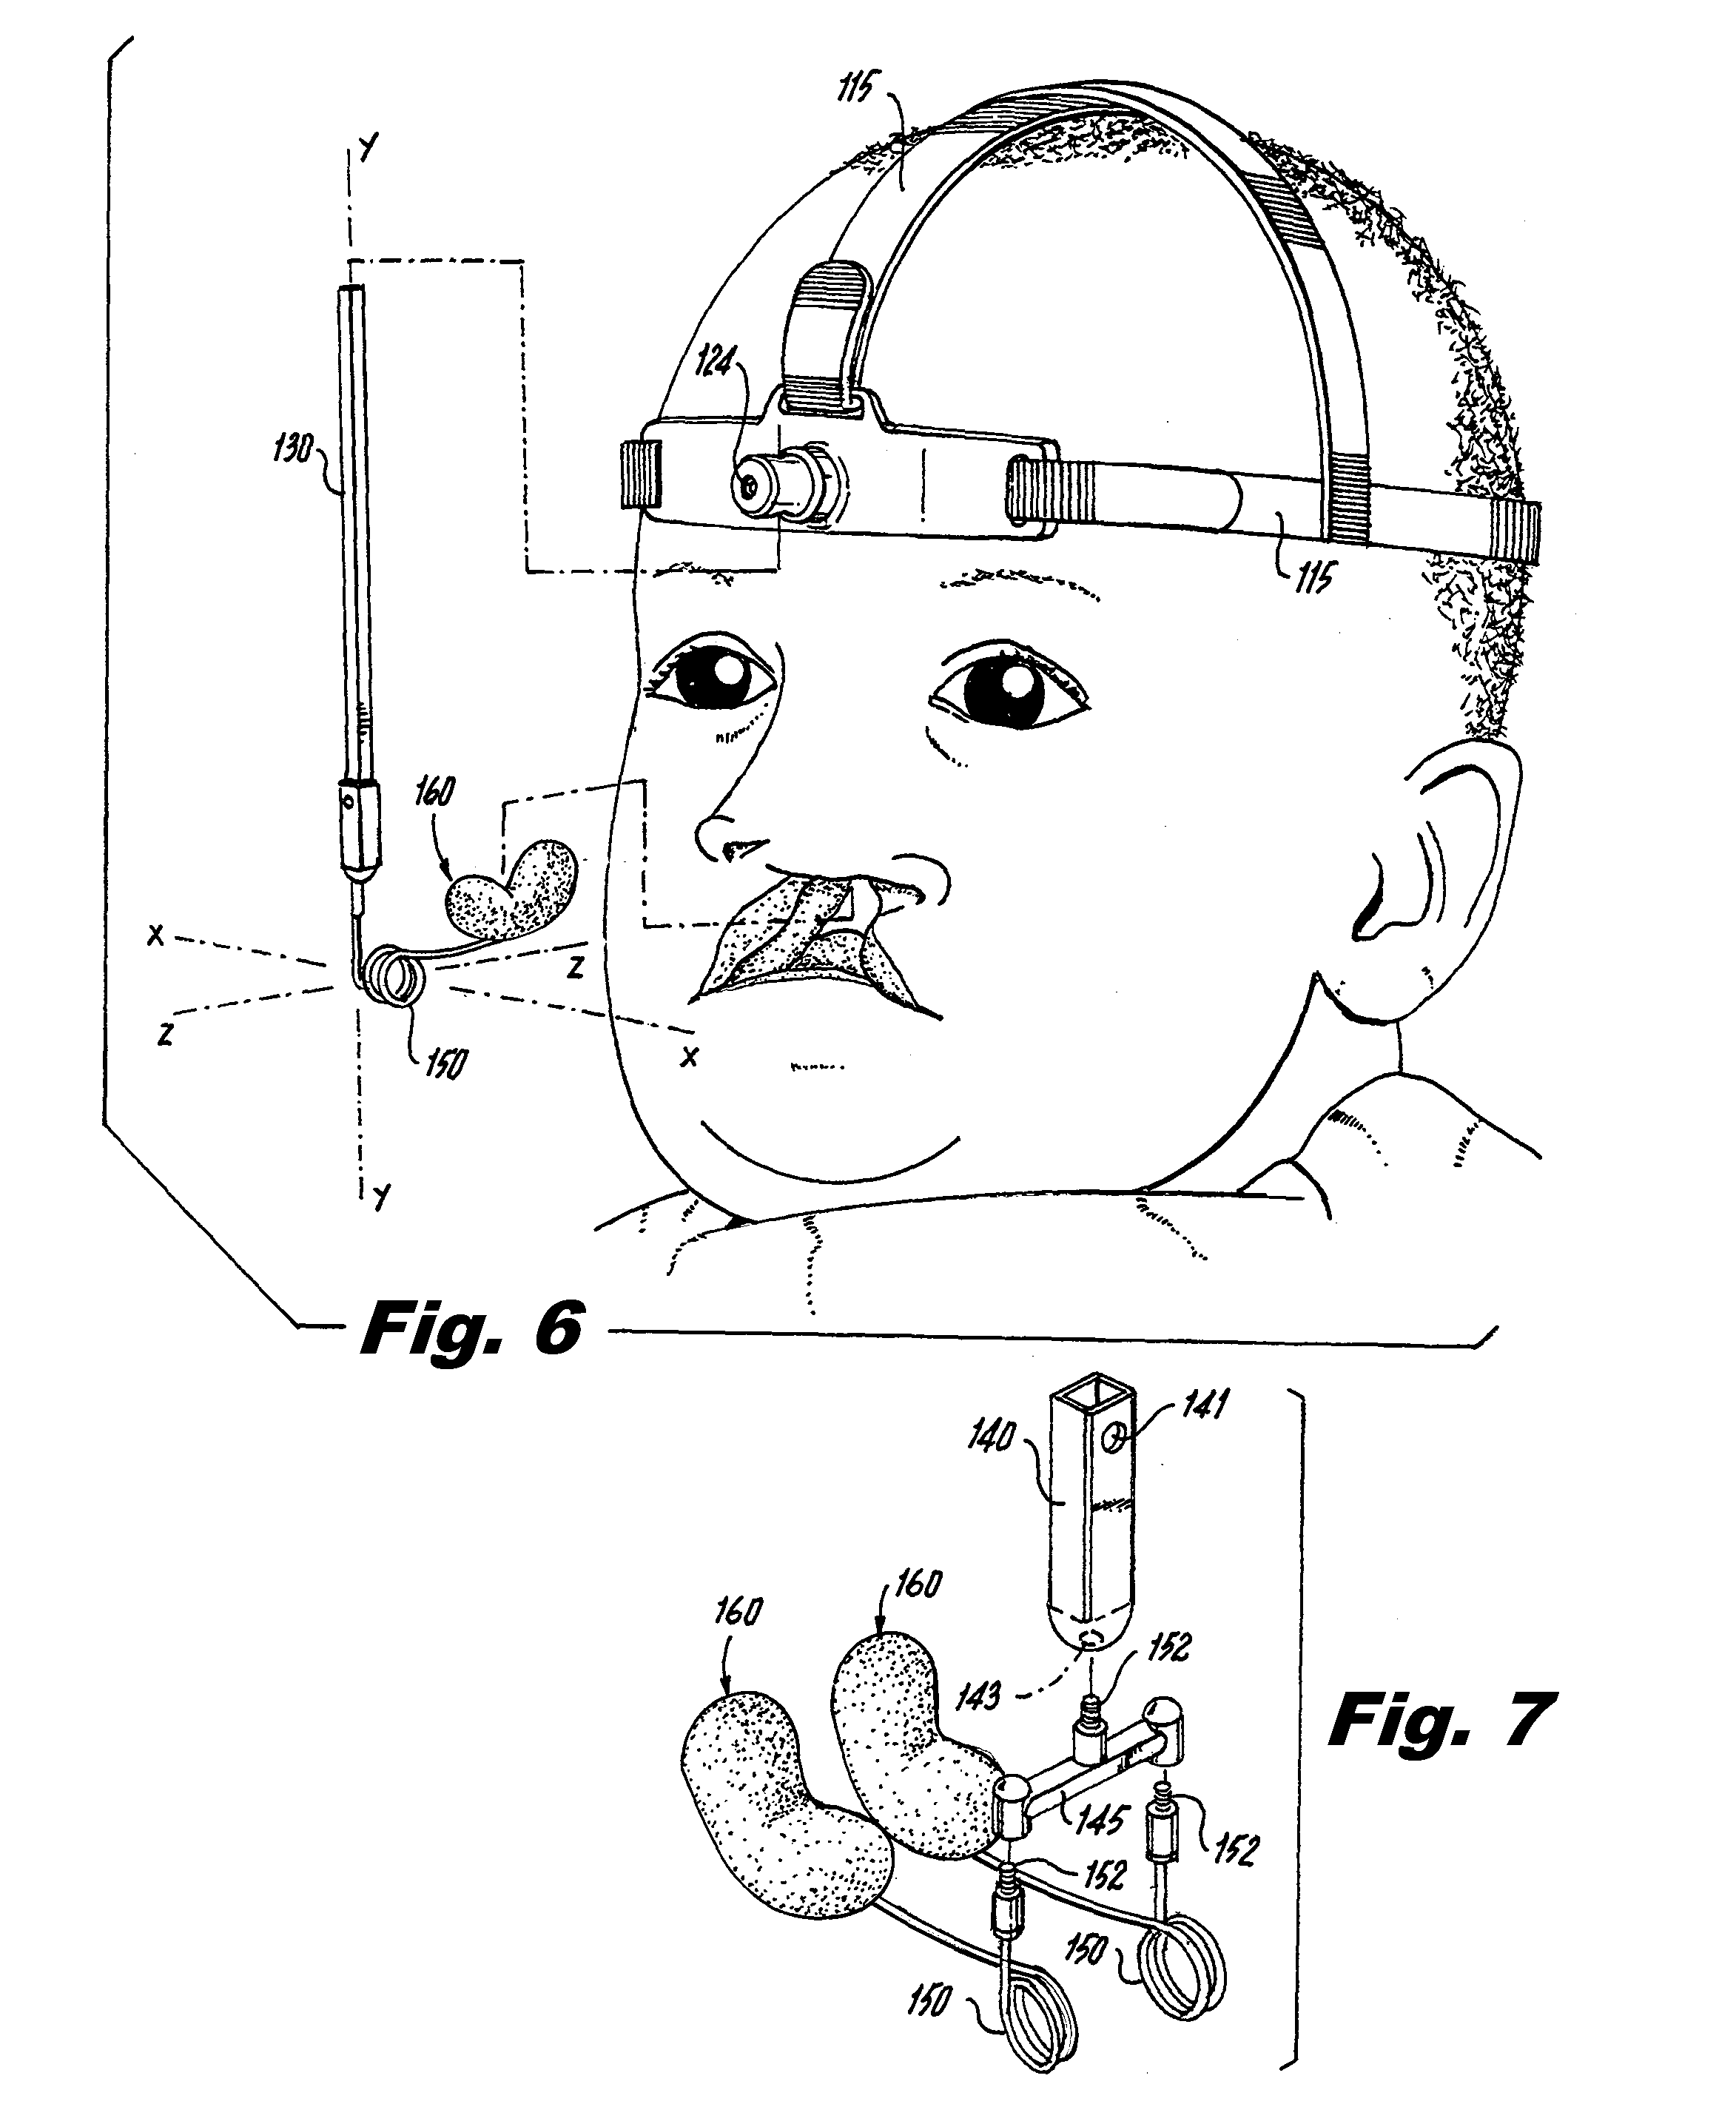 Extraoral Nasal Molding Headgear Device for the Treatment of Cleft Lip and Palate